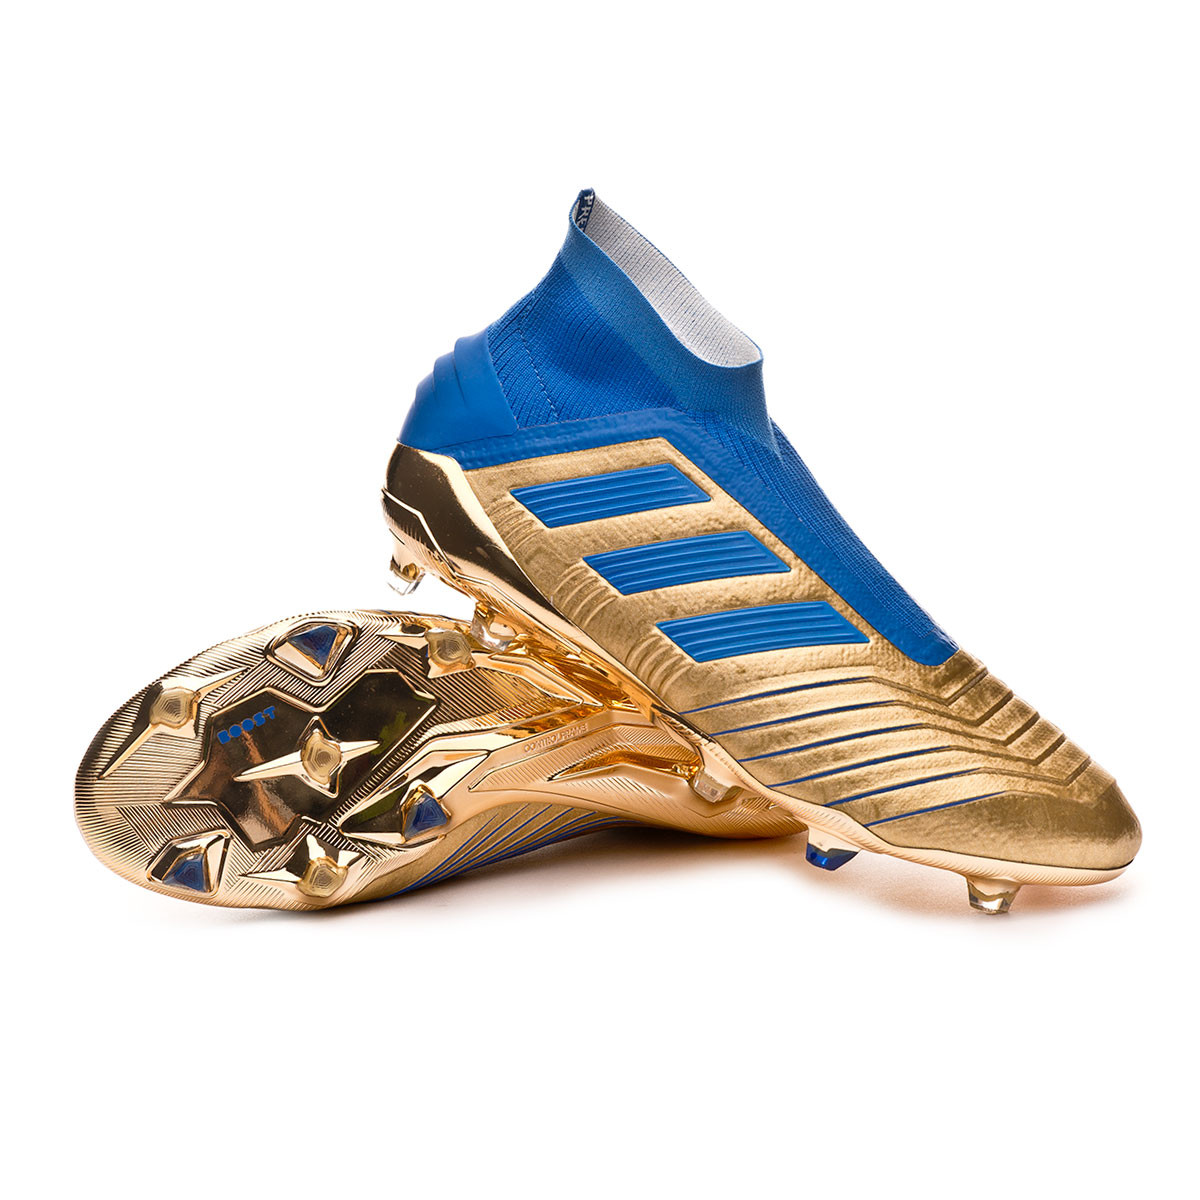 blue and gold adidas